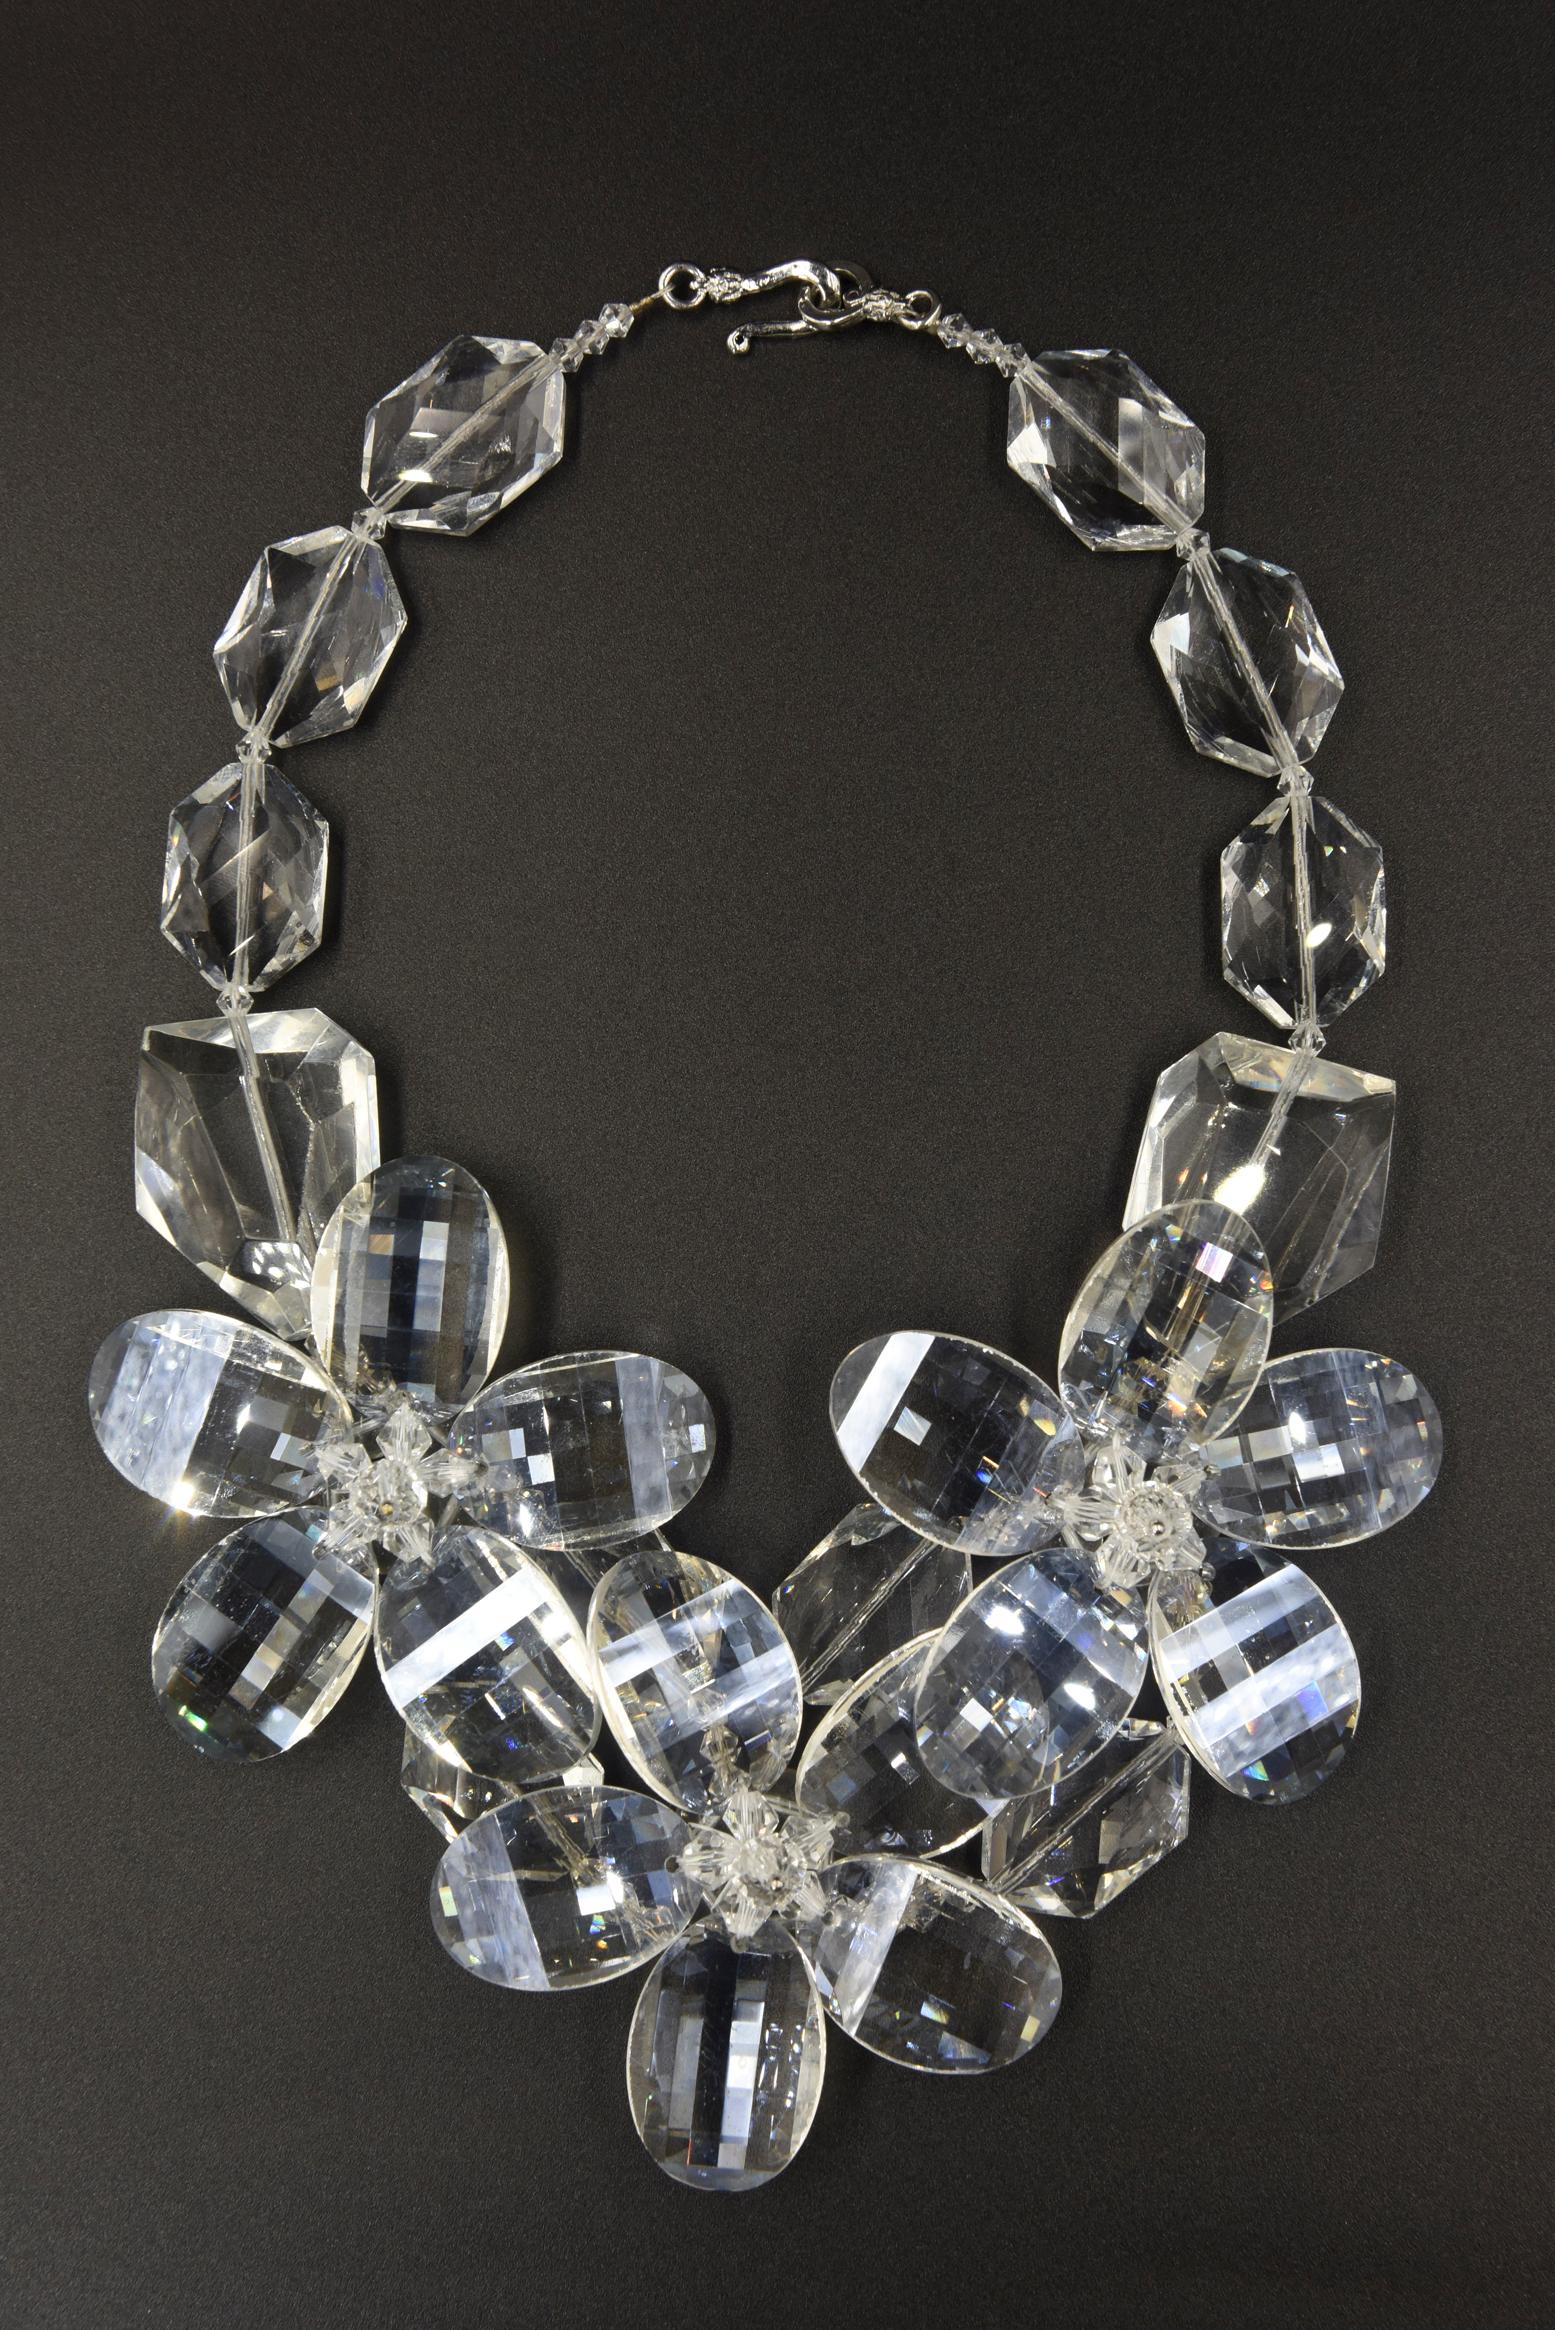 Impressive facetted lucite necklace featuring three large 5 - petal flowers in the center strung on large faceted clear lucite beads.  The back has a hook and eye closure.